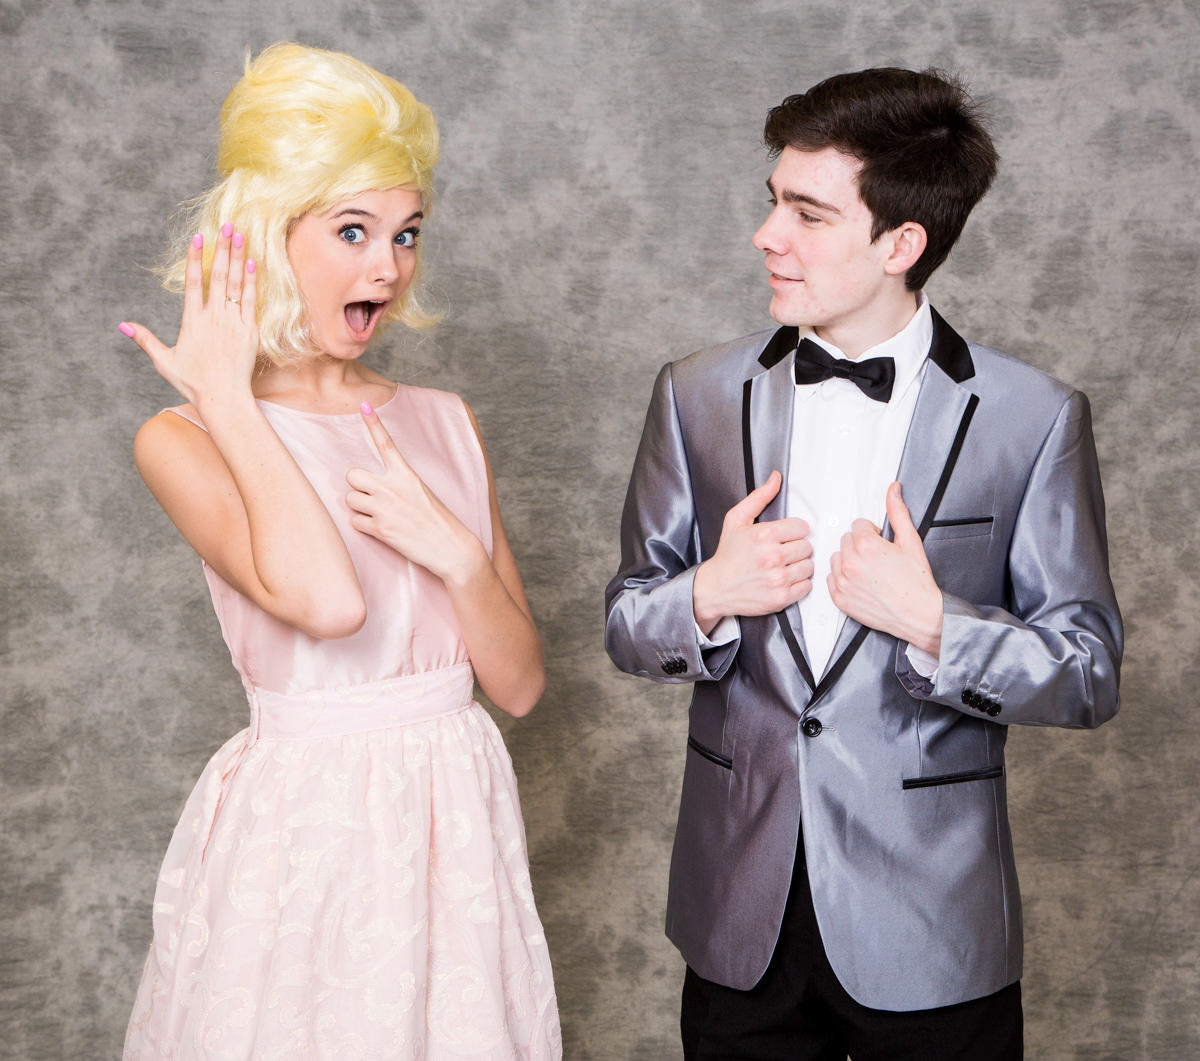 Natalie Mehl, 16, of Lebanon Twp. appears as Amber Von Tussle, and Avery Stoker, 18, of Clinton appears as teen heartthrob Link Larkin in ShowKids Invitational Theatre’s production of HAIRSPRAY. Only four performances, each at Voorhees High School in Glen Gardner, NJ: Saturday, May 6 at 7:30pm; Sunday, May 7 at 2:00pm; Friday, May 12 at 7:30pm; and, Saturday, May 13 at 7:30pm. Tickets available at www.showkids.org 